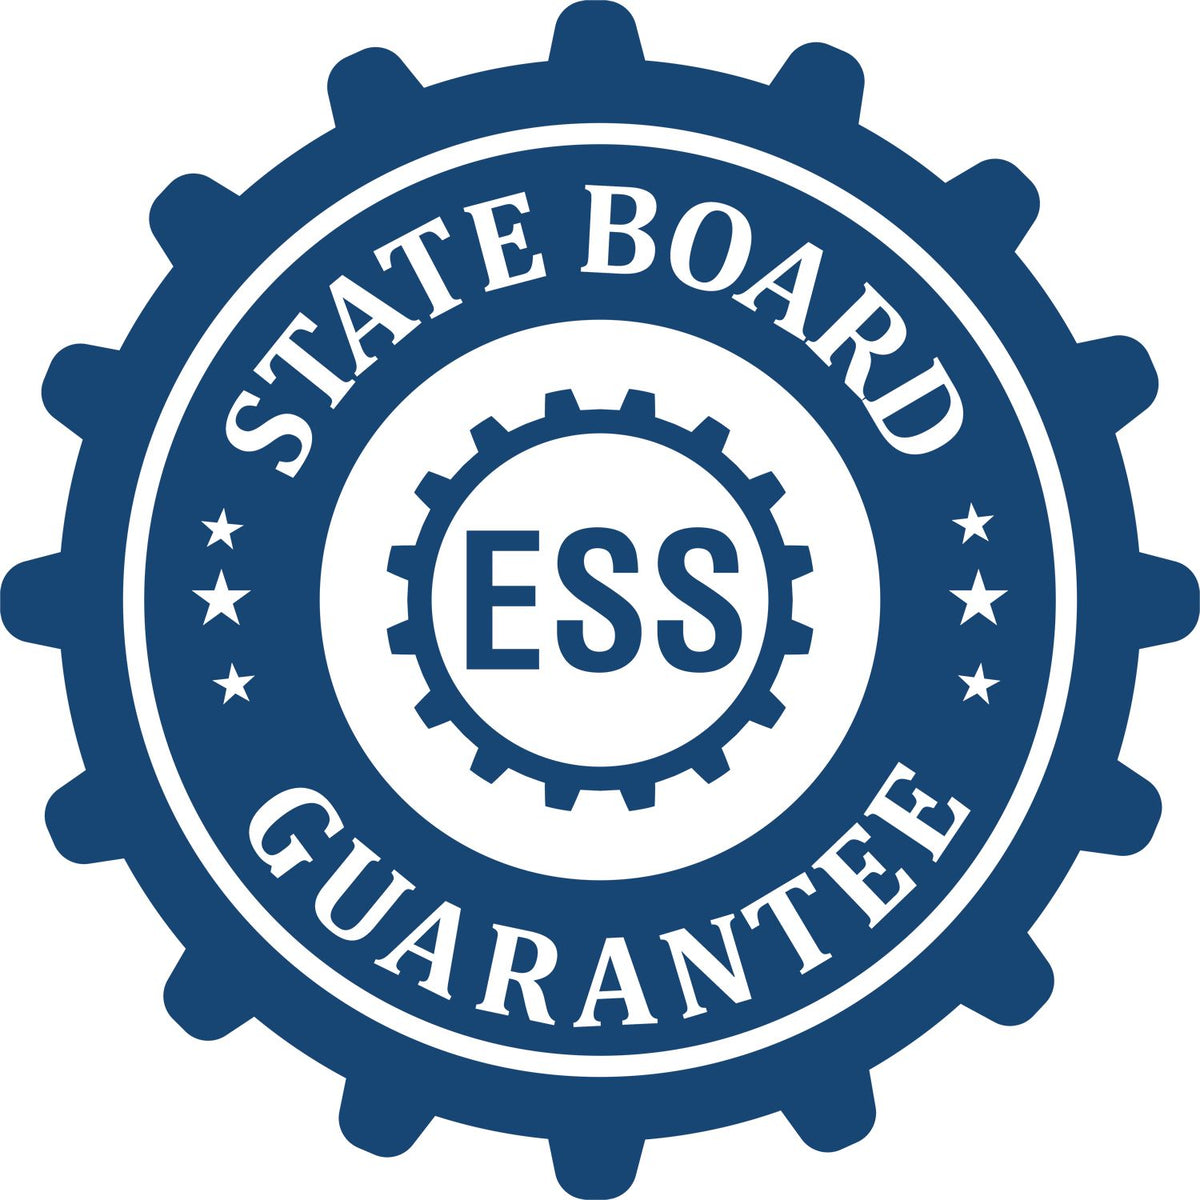 An emblem in a gear shape illustrating a state board guarantee for the State of Alabama Long Reach Architectural Embossing Seal product.